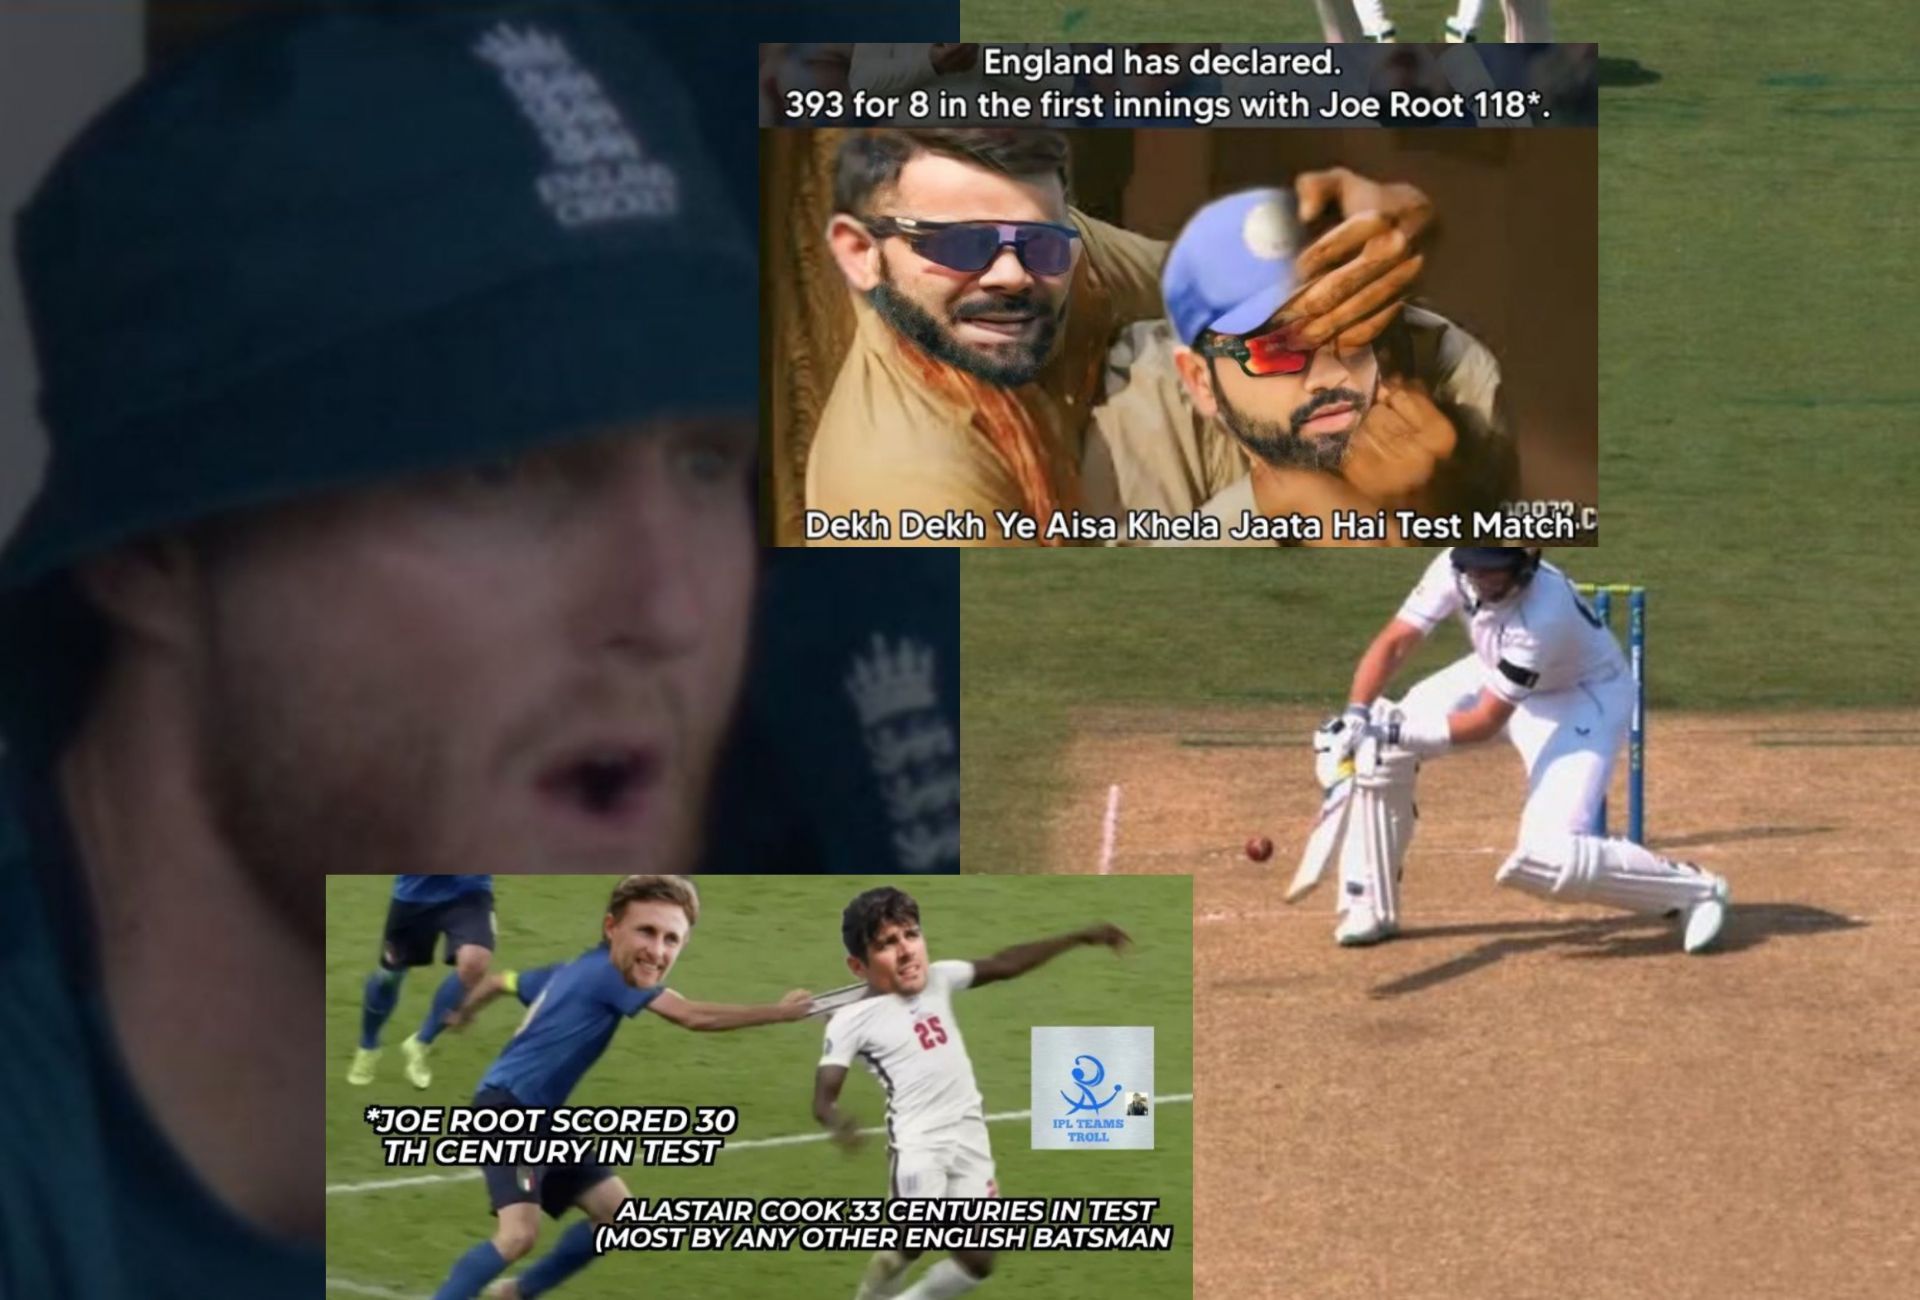 Top 10 funny memes from day 1 of Ashes Test. 